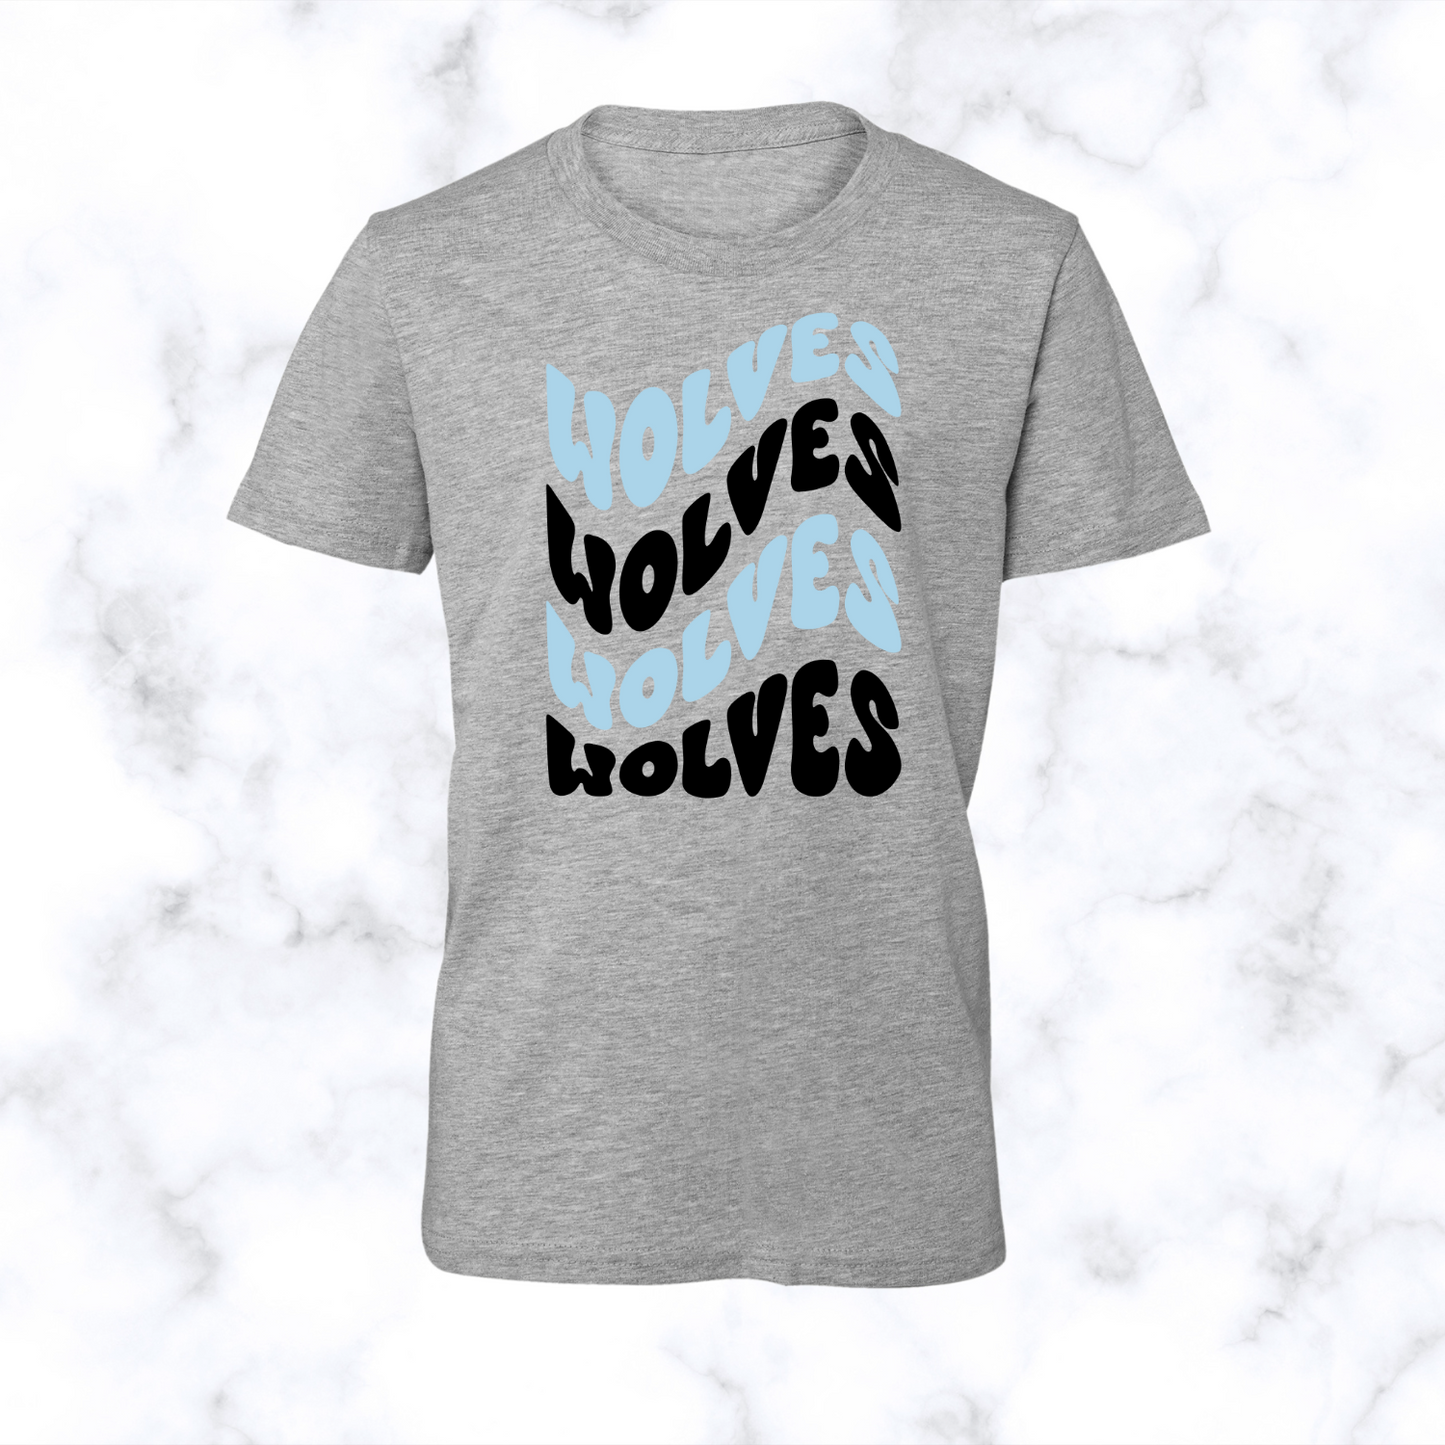 Wolves Wavy Tee Youth